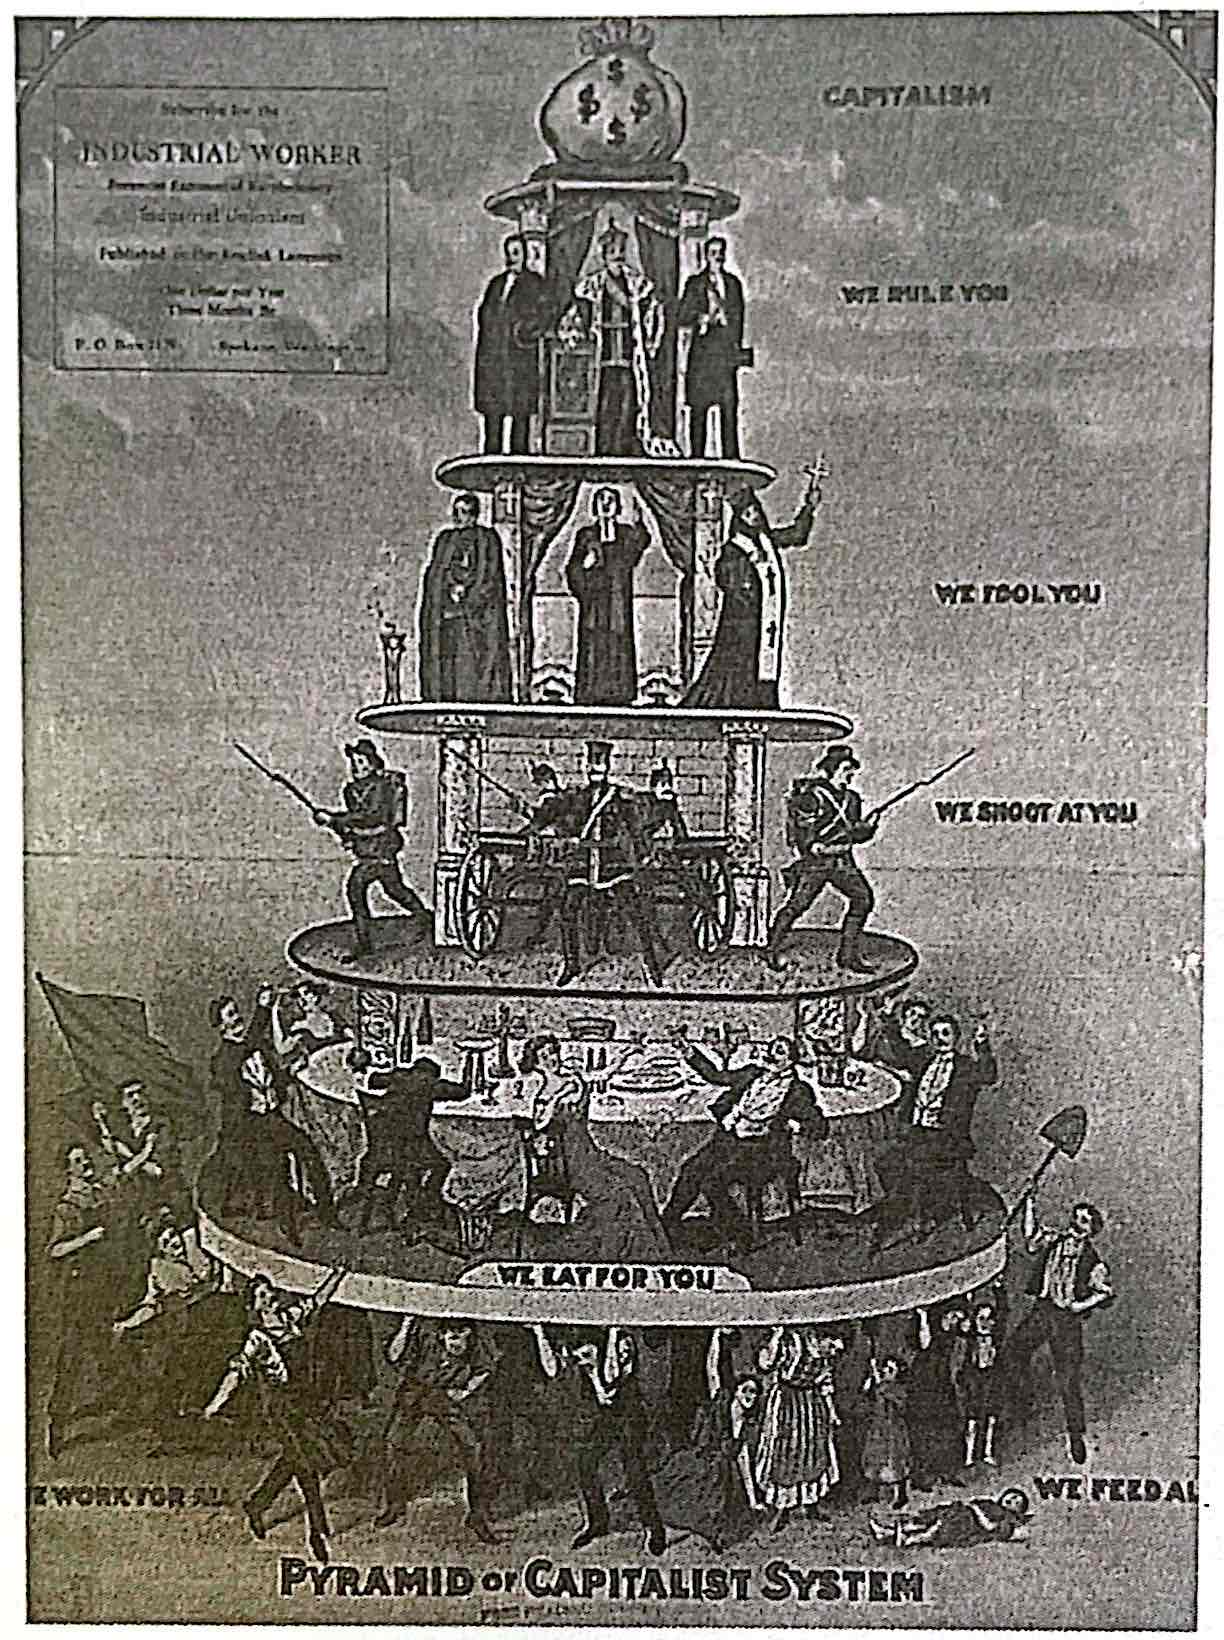 <p><strong>8-2. </strong>Which group would agree with the view of the capitalist system offered by the poster?</p><p>a) Pacifists<br>b) Nationalists<br>c) Socialists<br>d) Bourgeoisie</p>